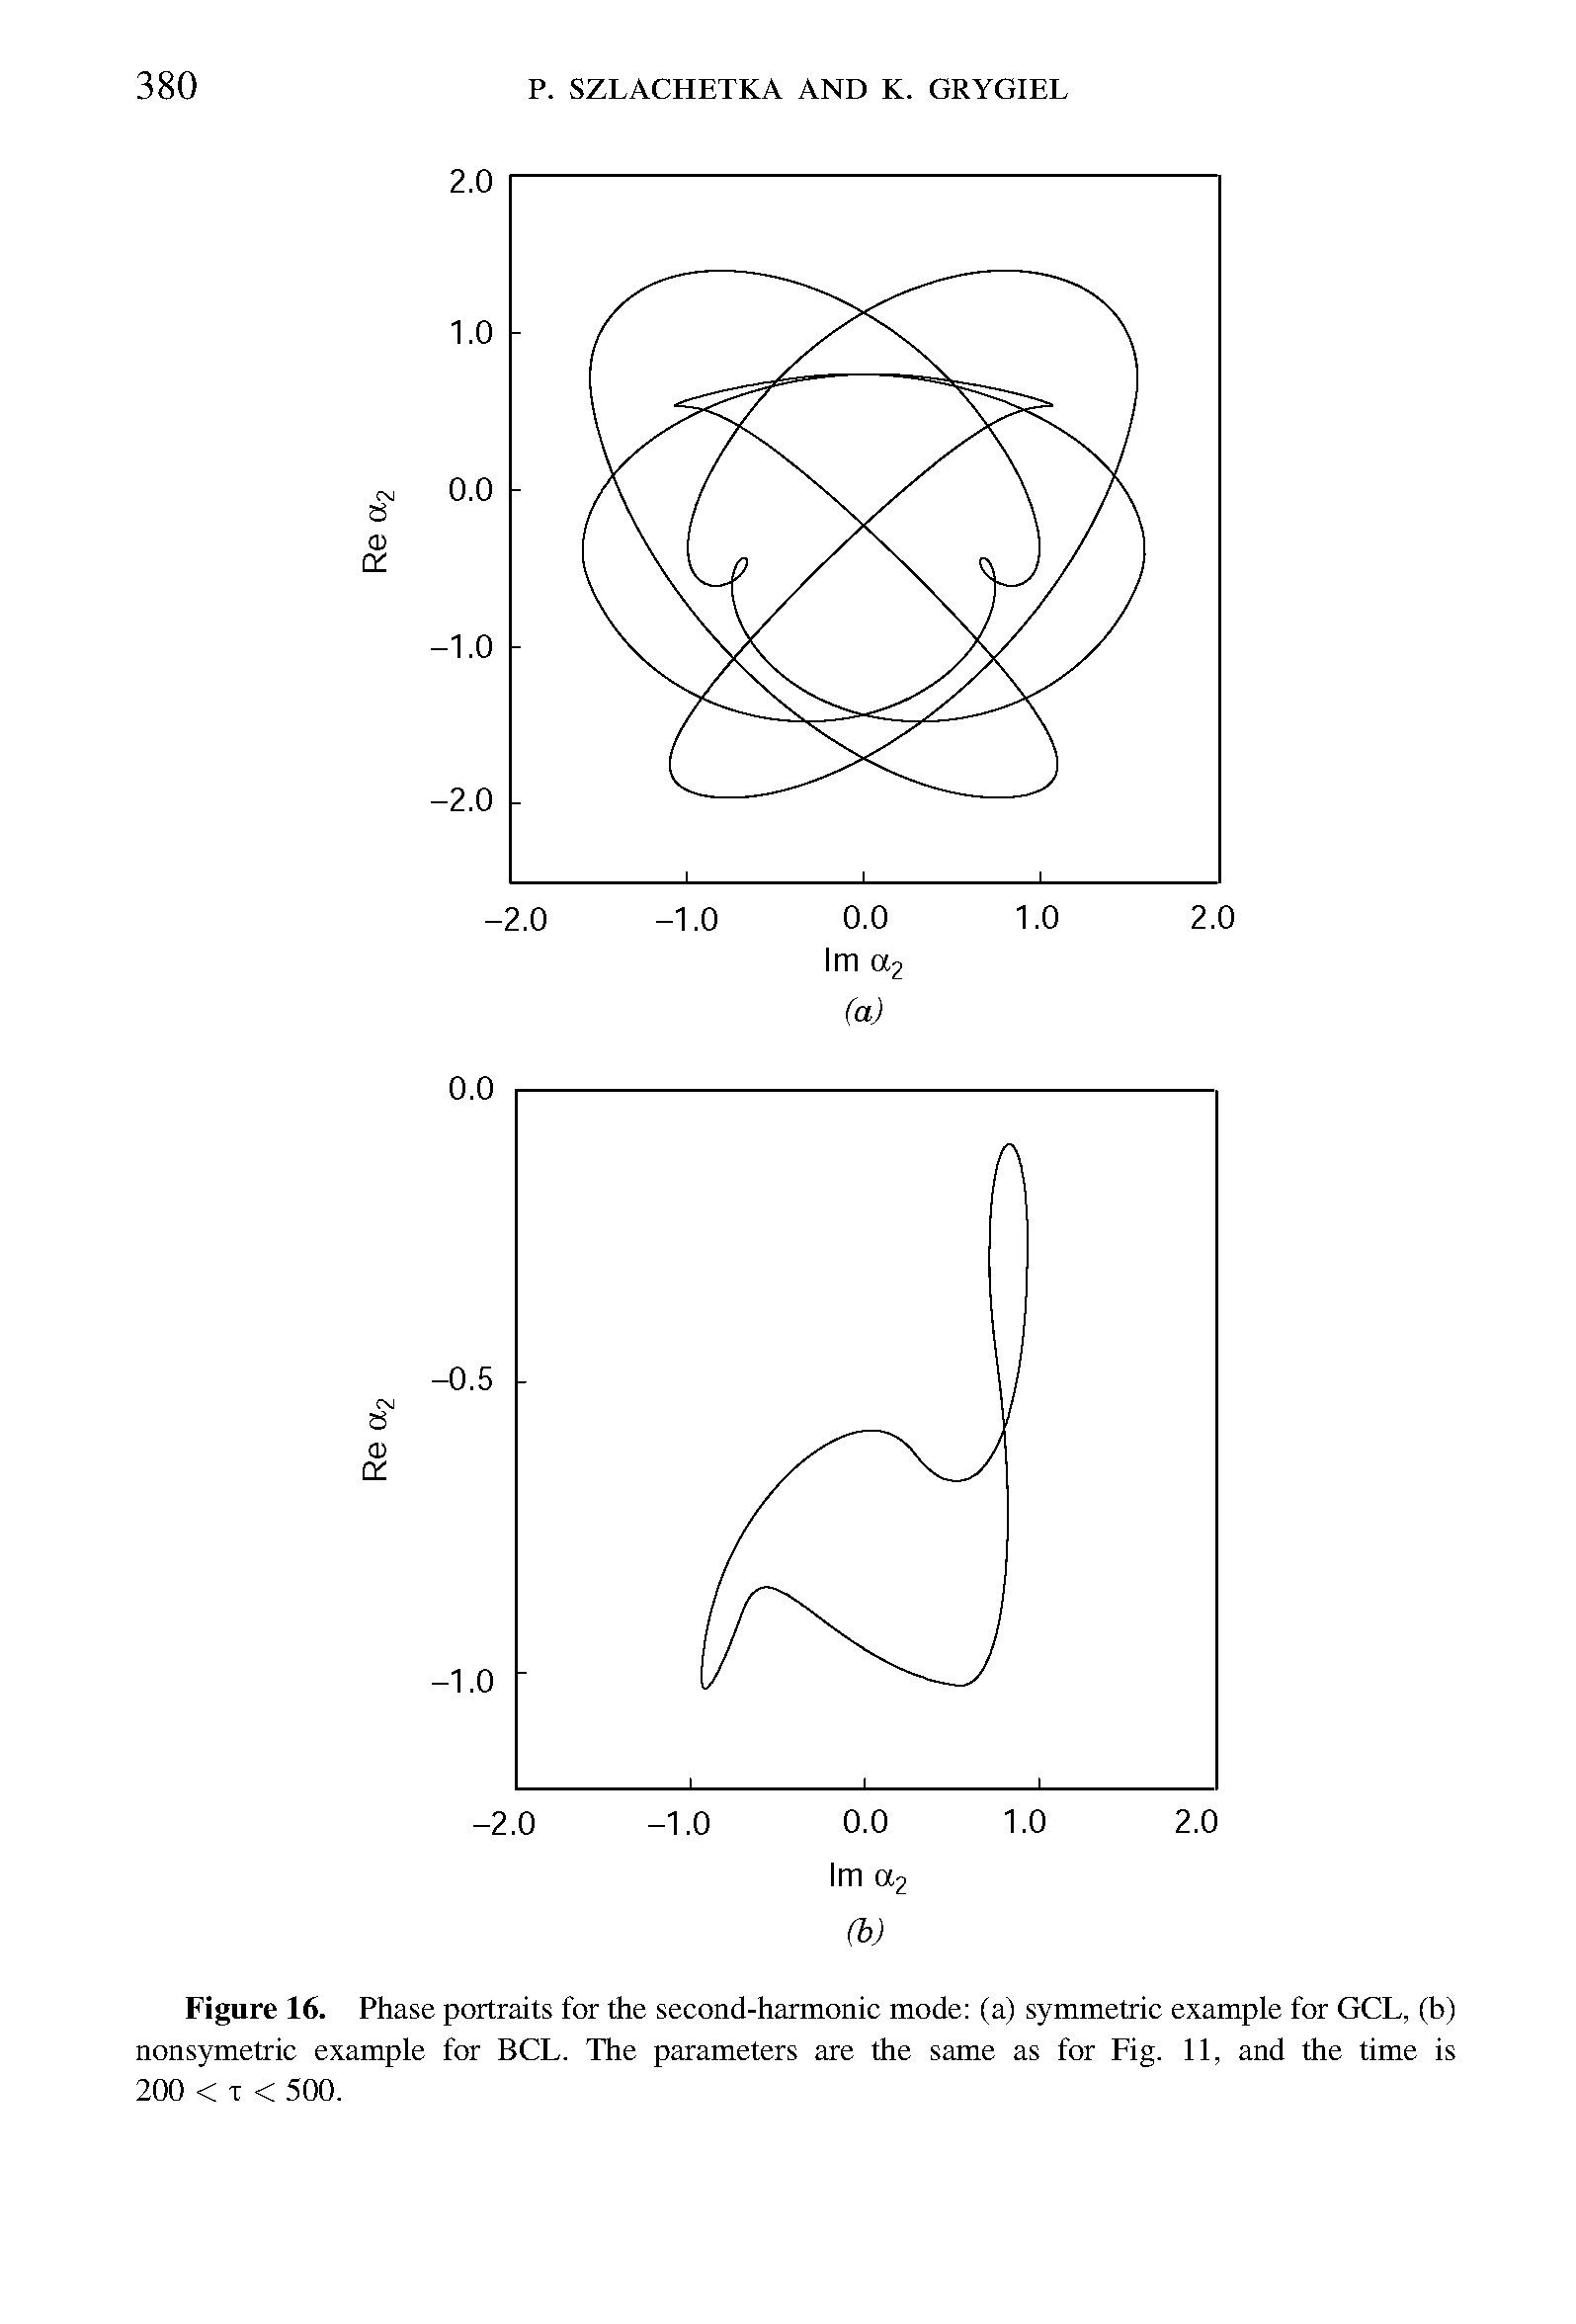 Figure 16. Phase portraits for the second-harmonic mode (a) symmetric example for GCL, (b) nonsymetric example for BCL. The parameters are the same as for Fig. 11, and the time is 200 < < 500.